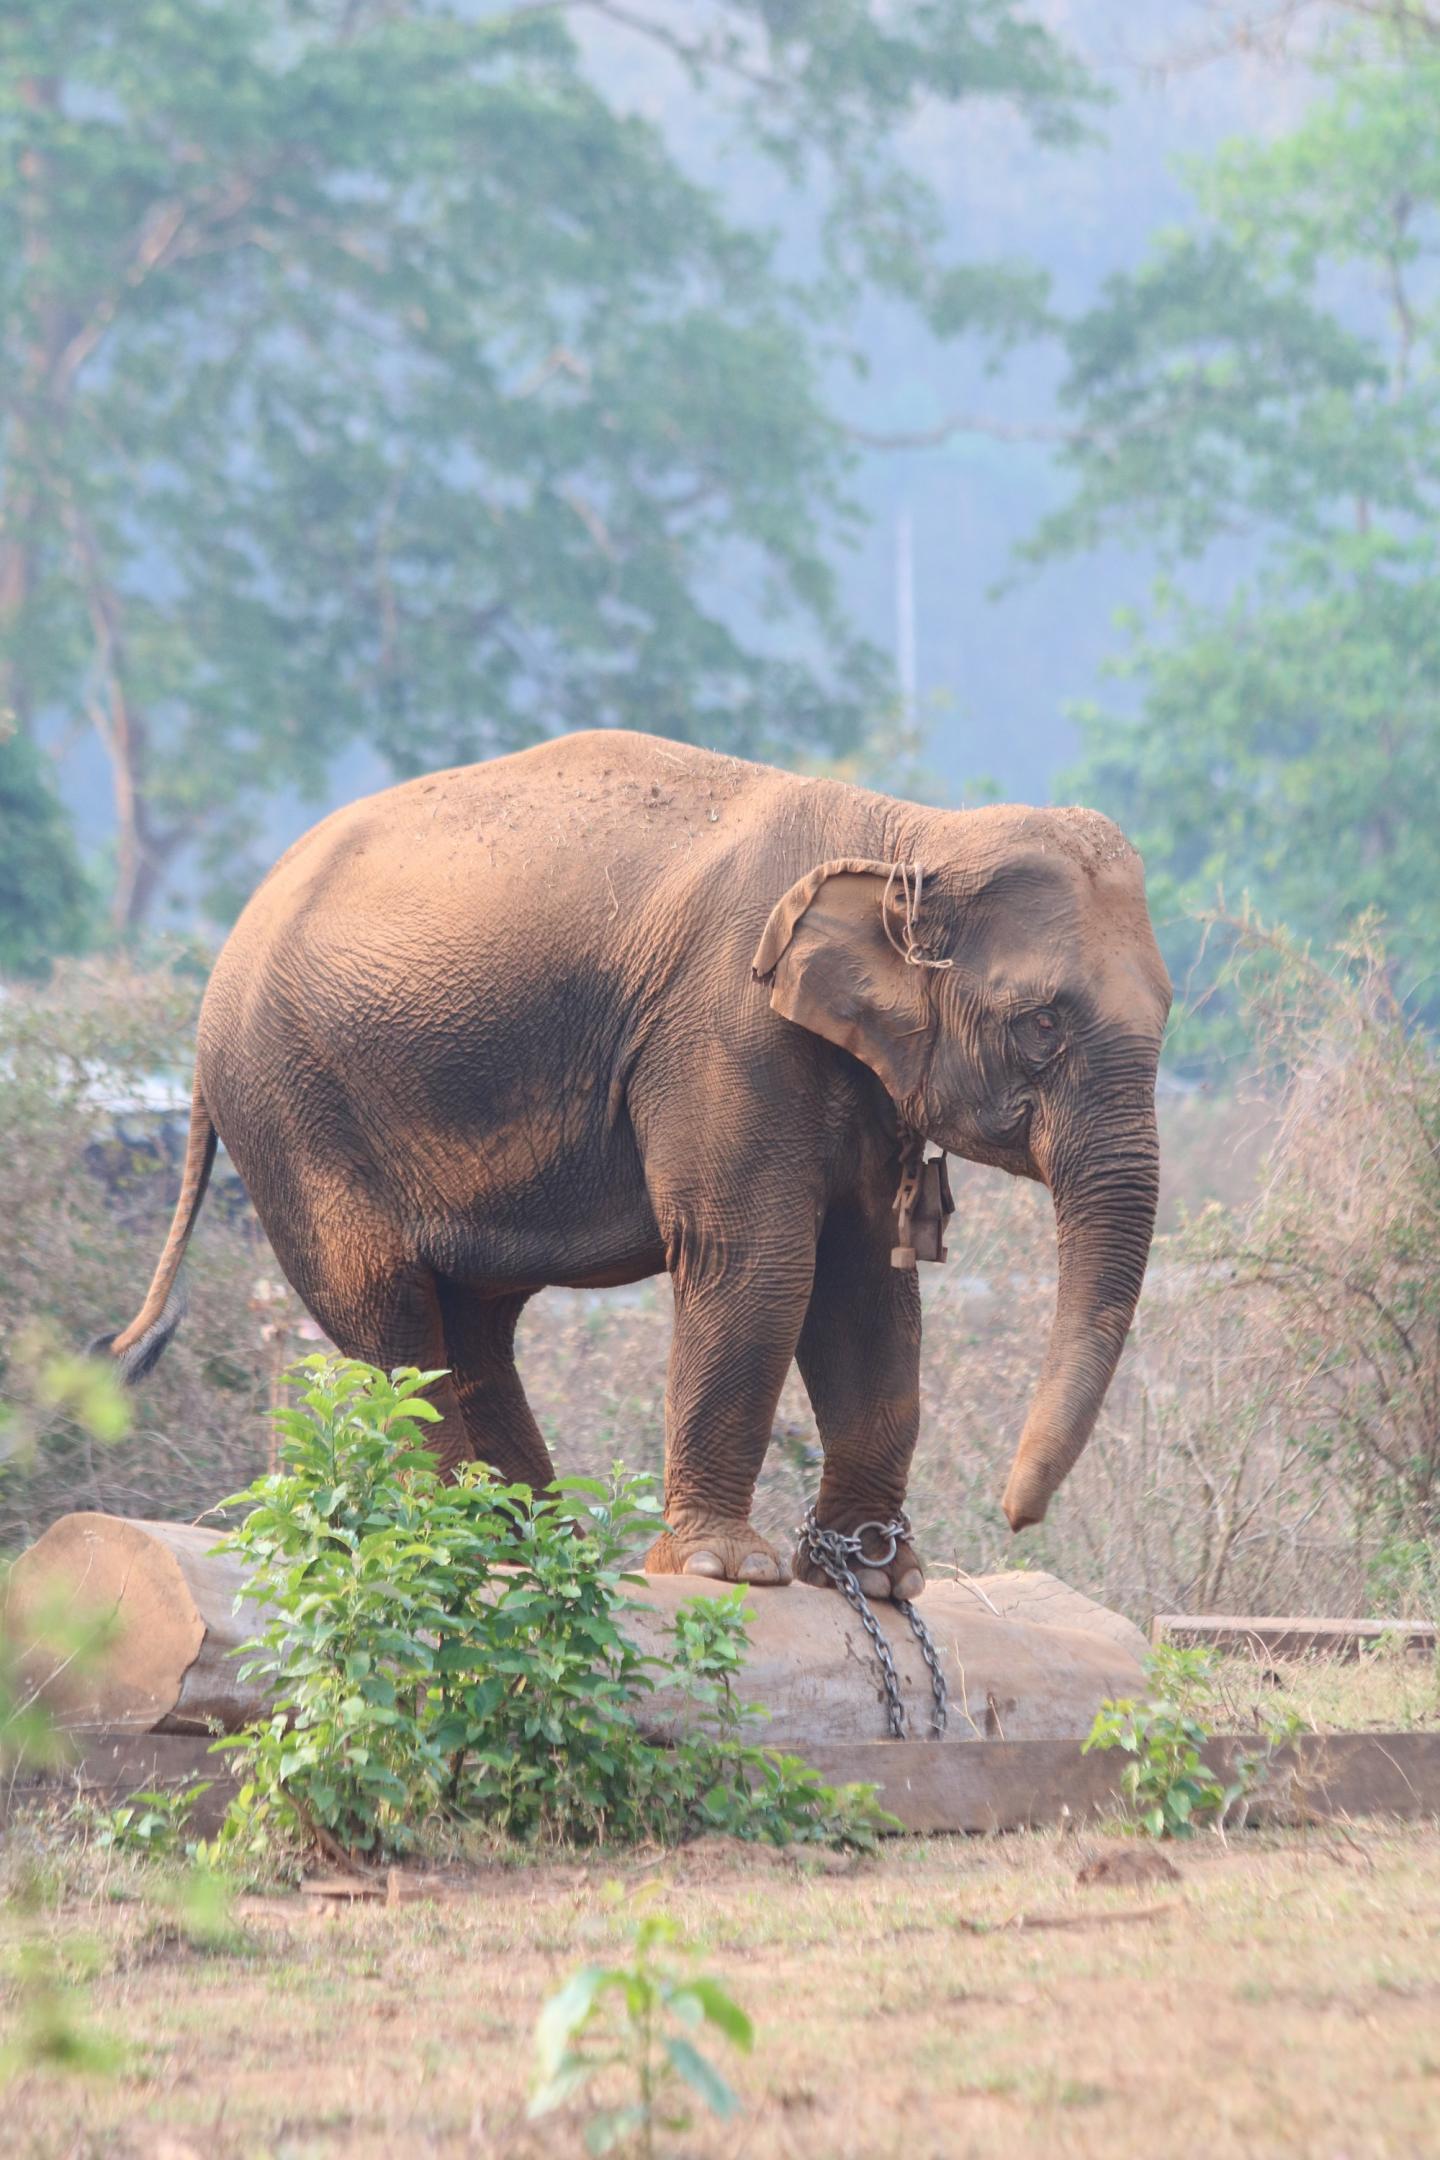 Most Captured Elephants Are Relatively Young